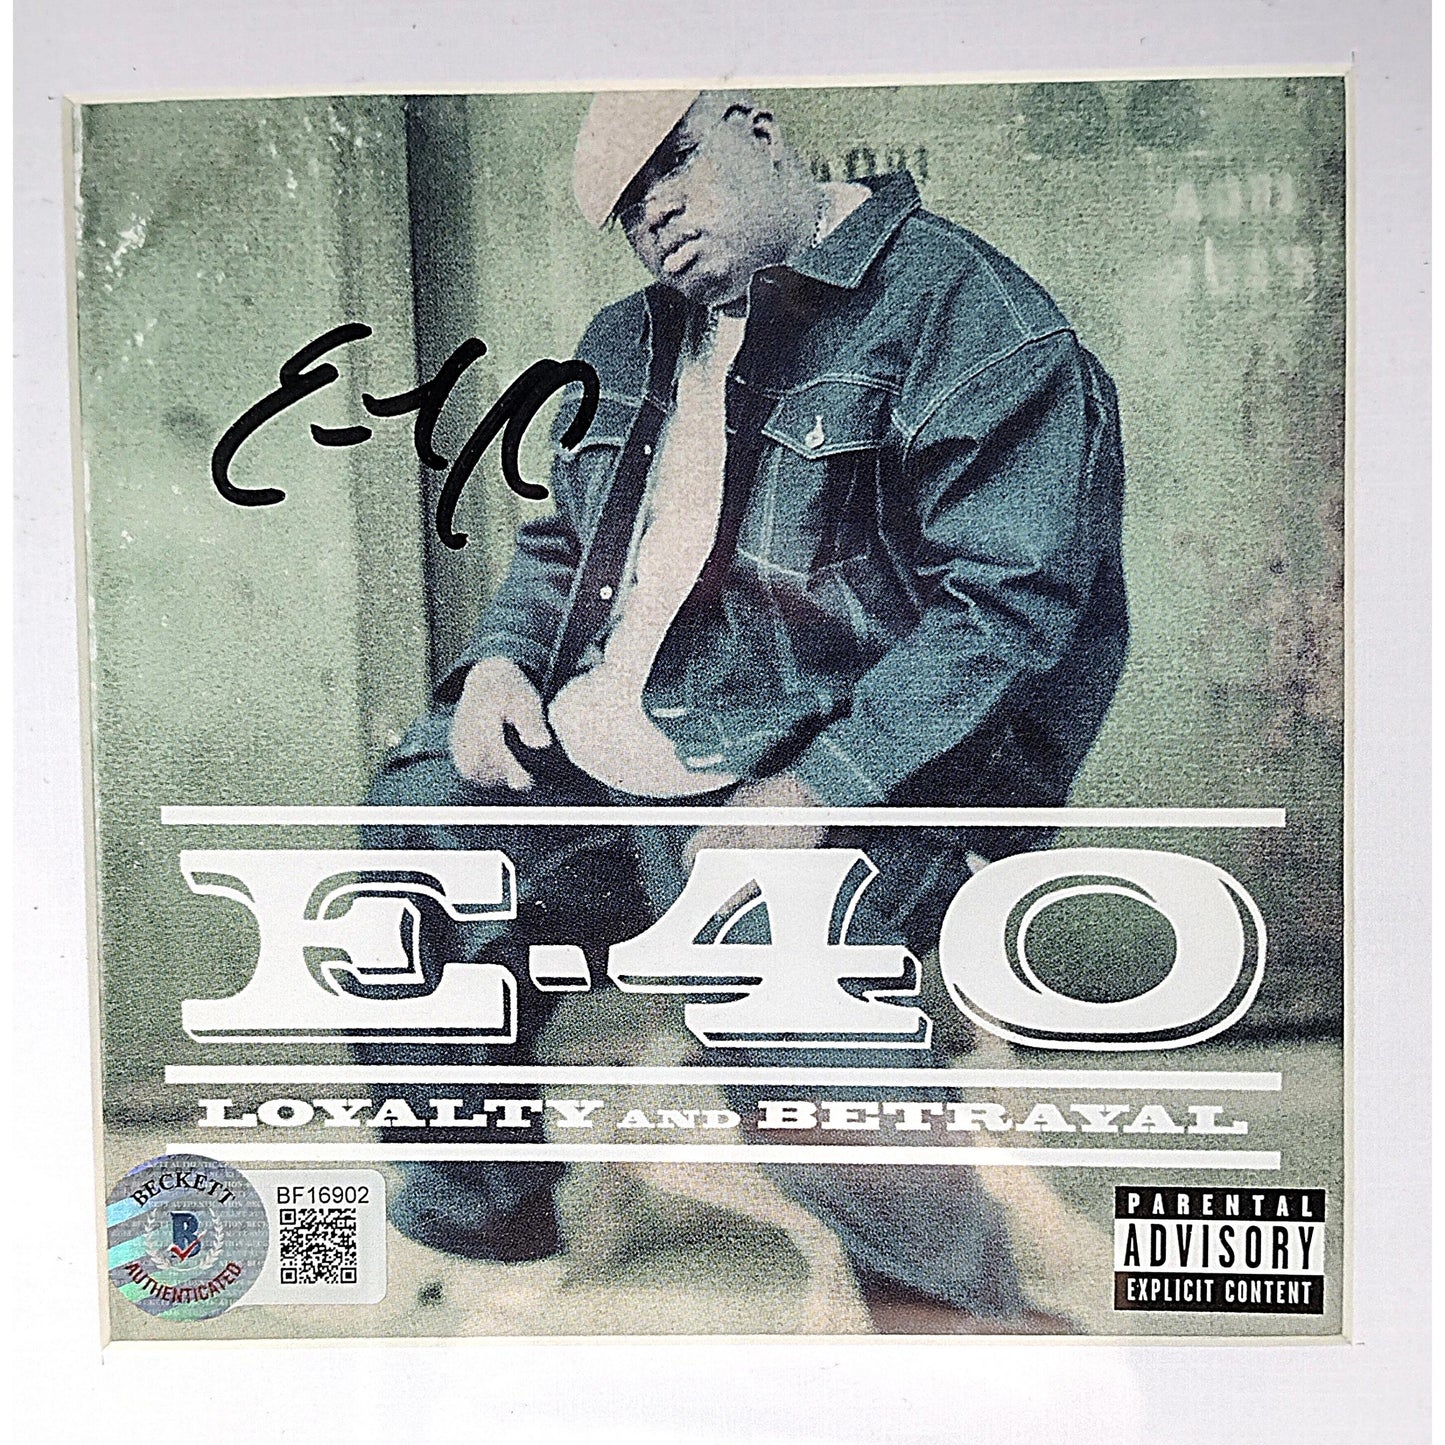 Music- Autographed- Rapper E-40 Signed Loyalty and Betrayal CD Cover Framed and Matted Display Beckett Certified Authentic BF16902 - 103